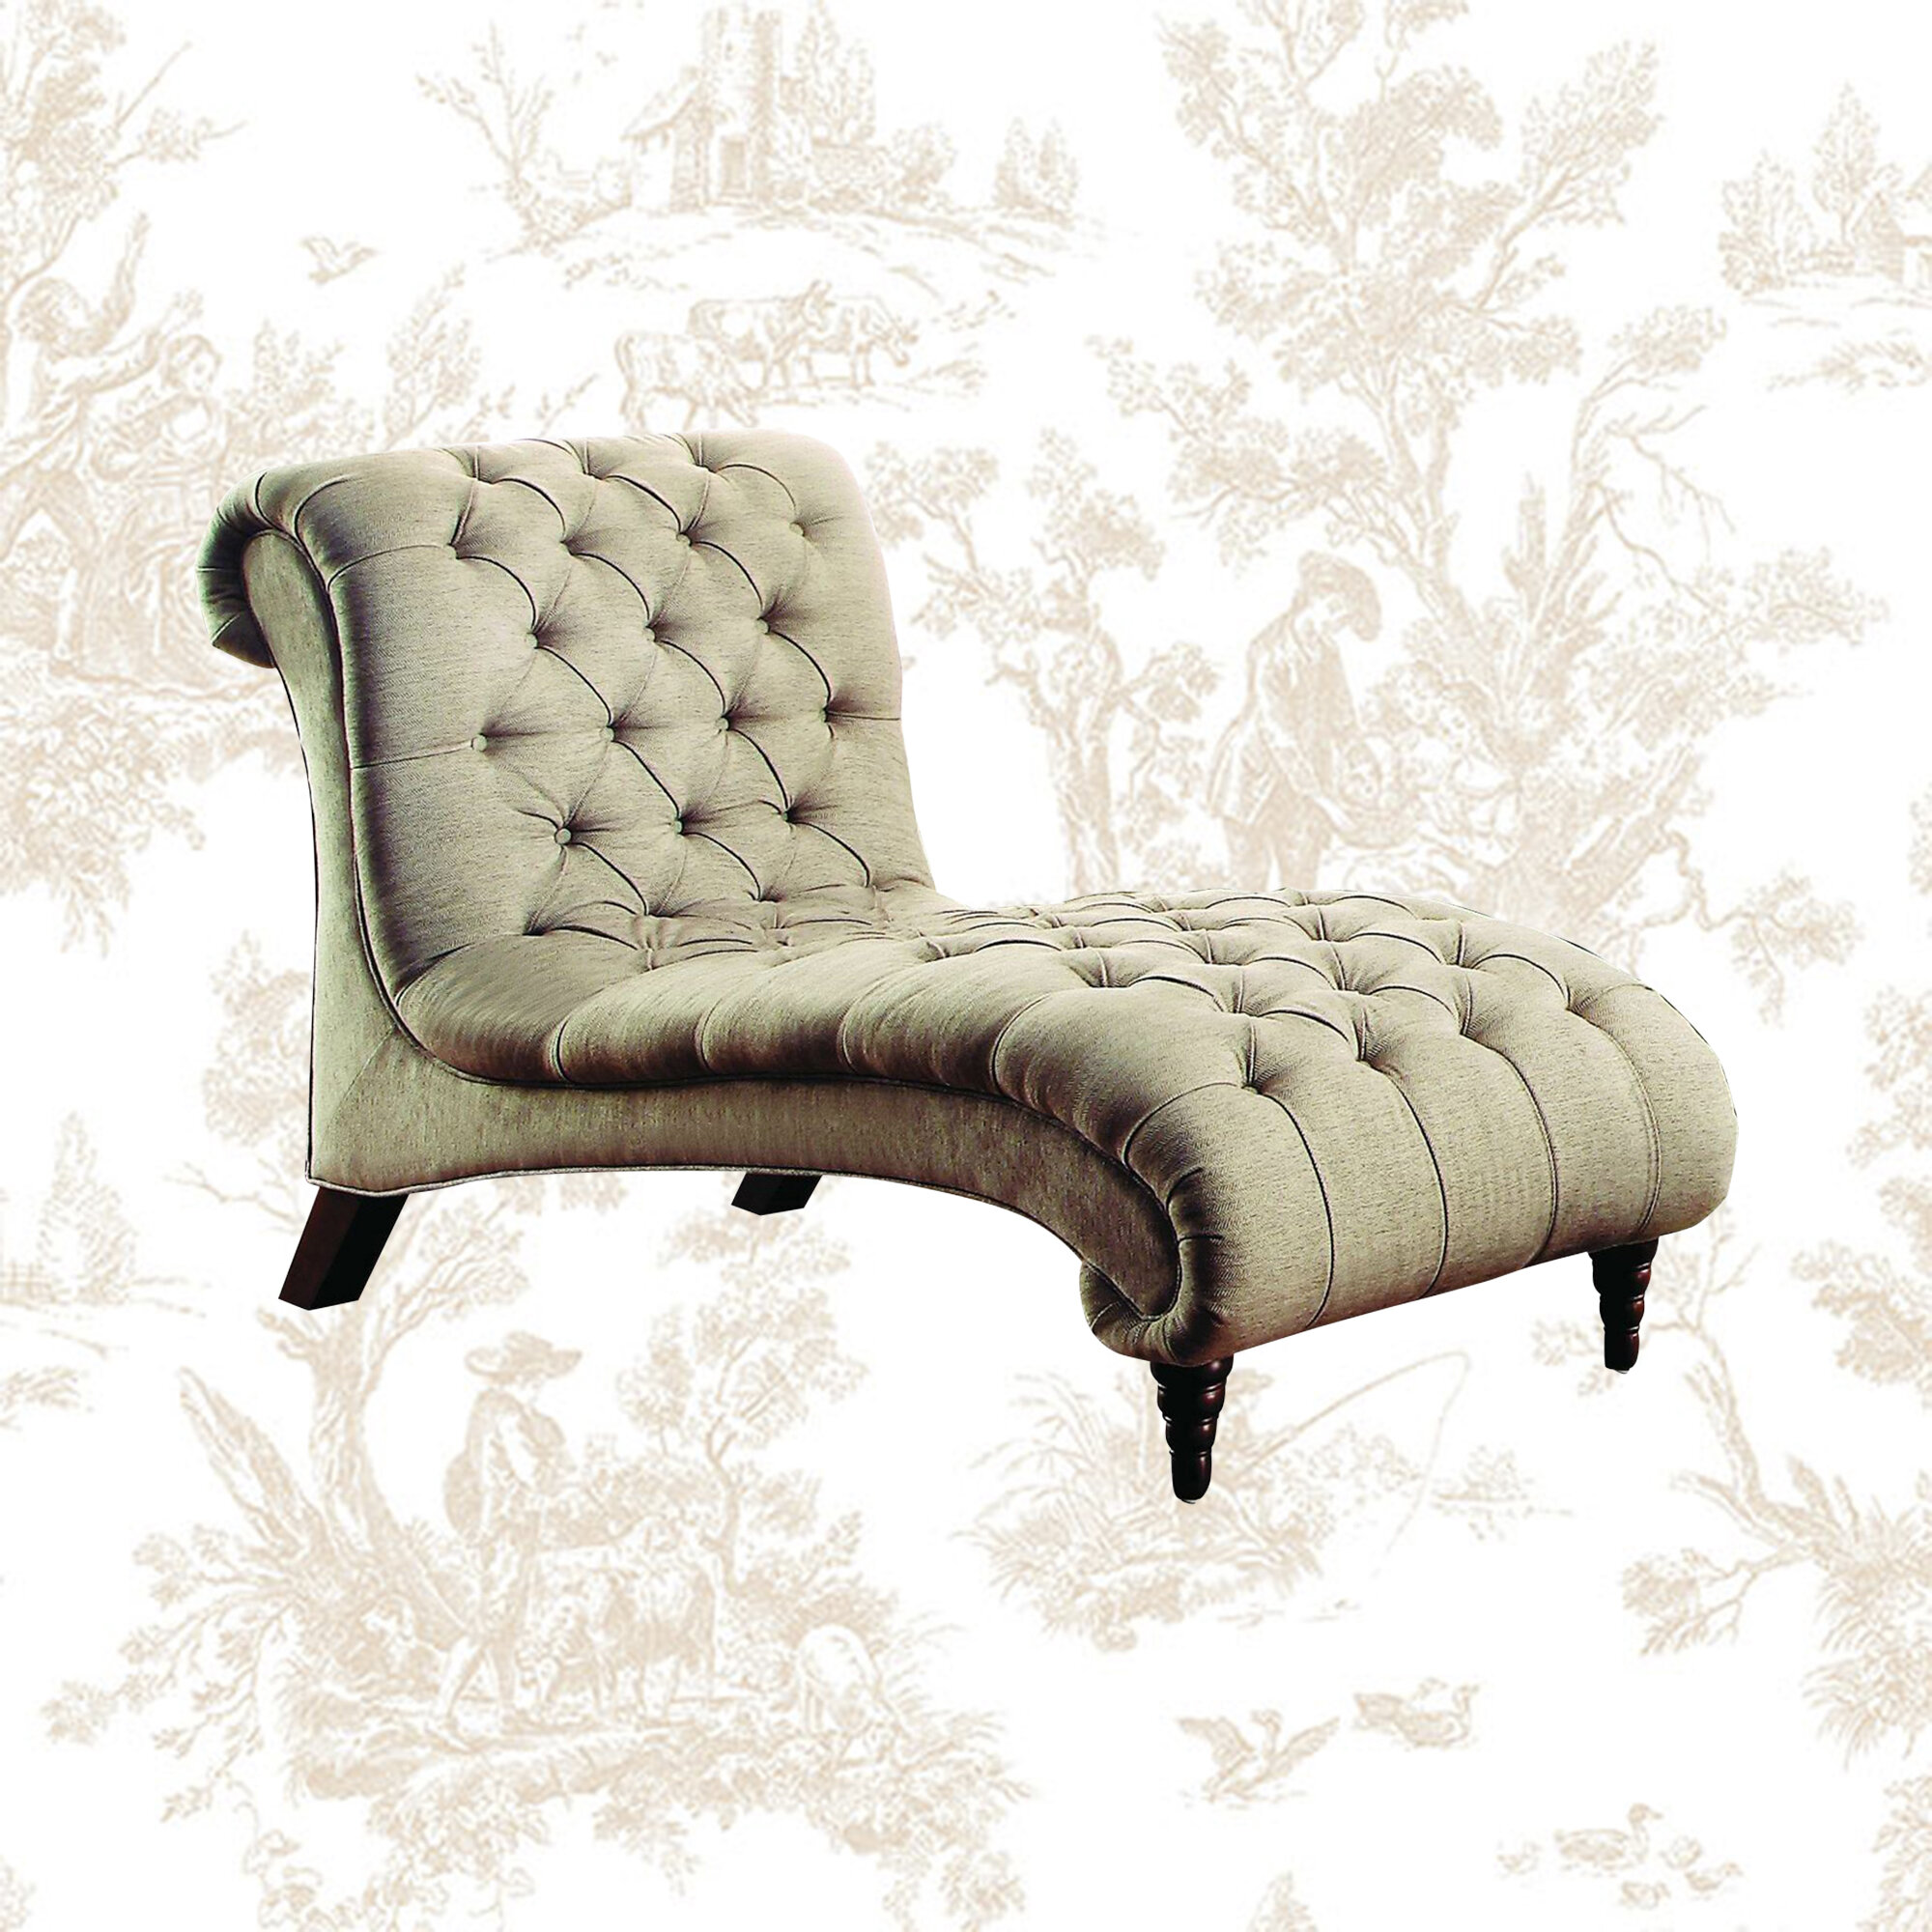 Pleasant Plains Upholstered Chaise Lounge